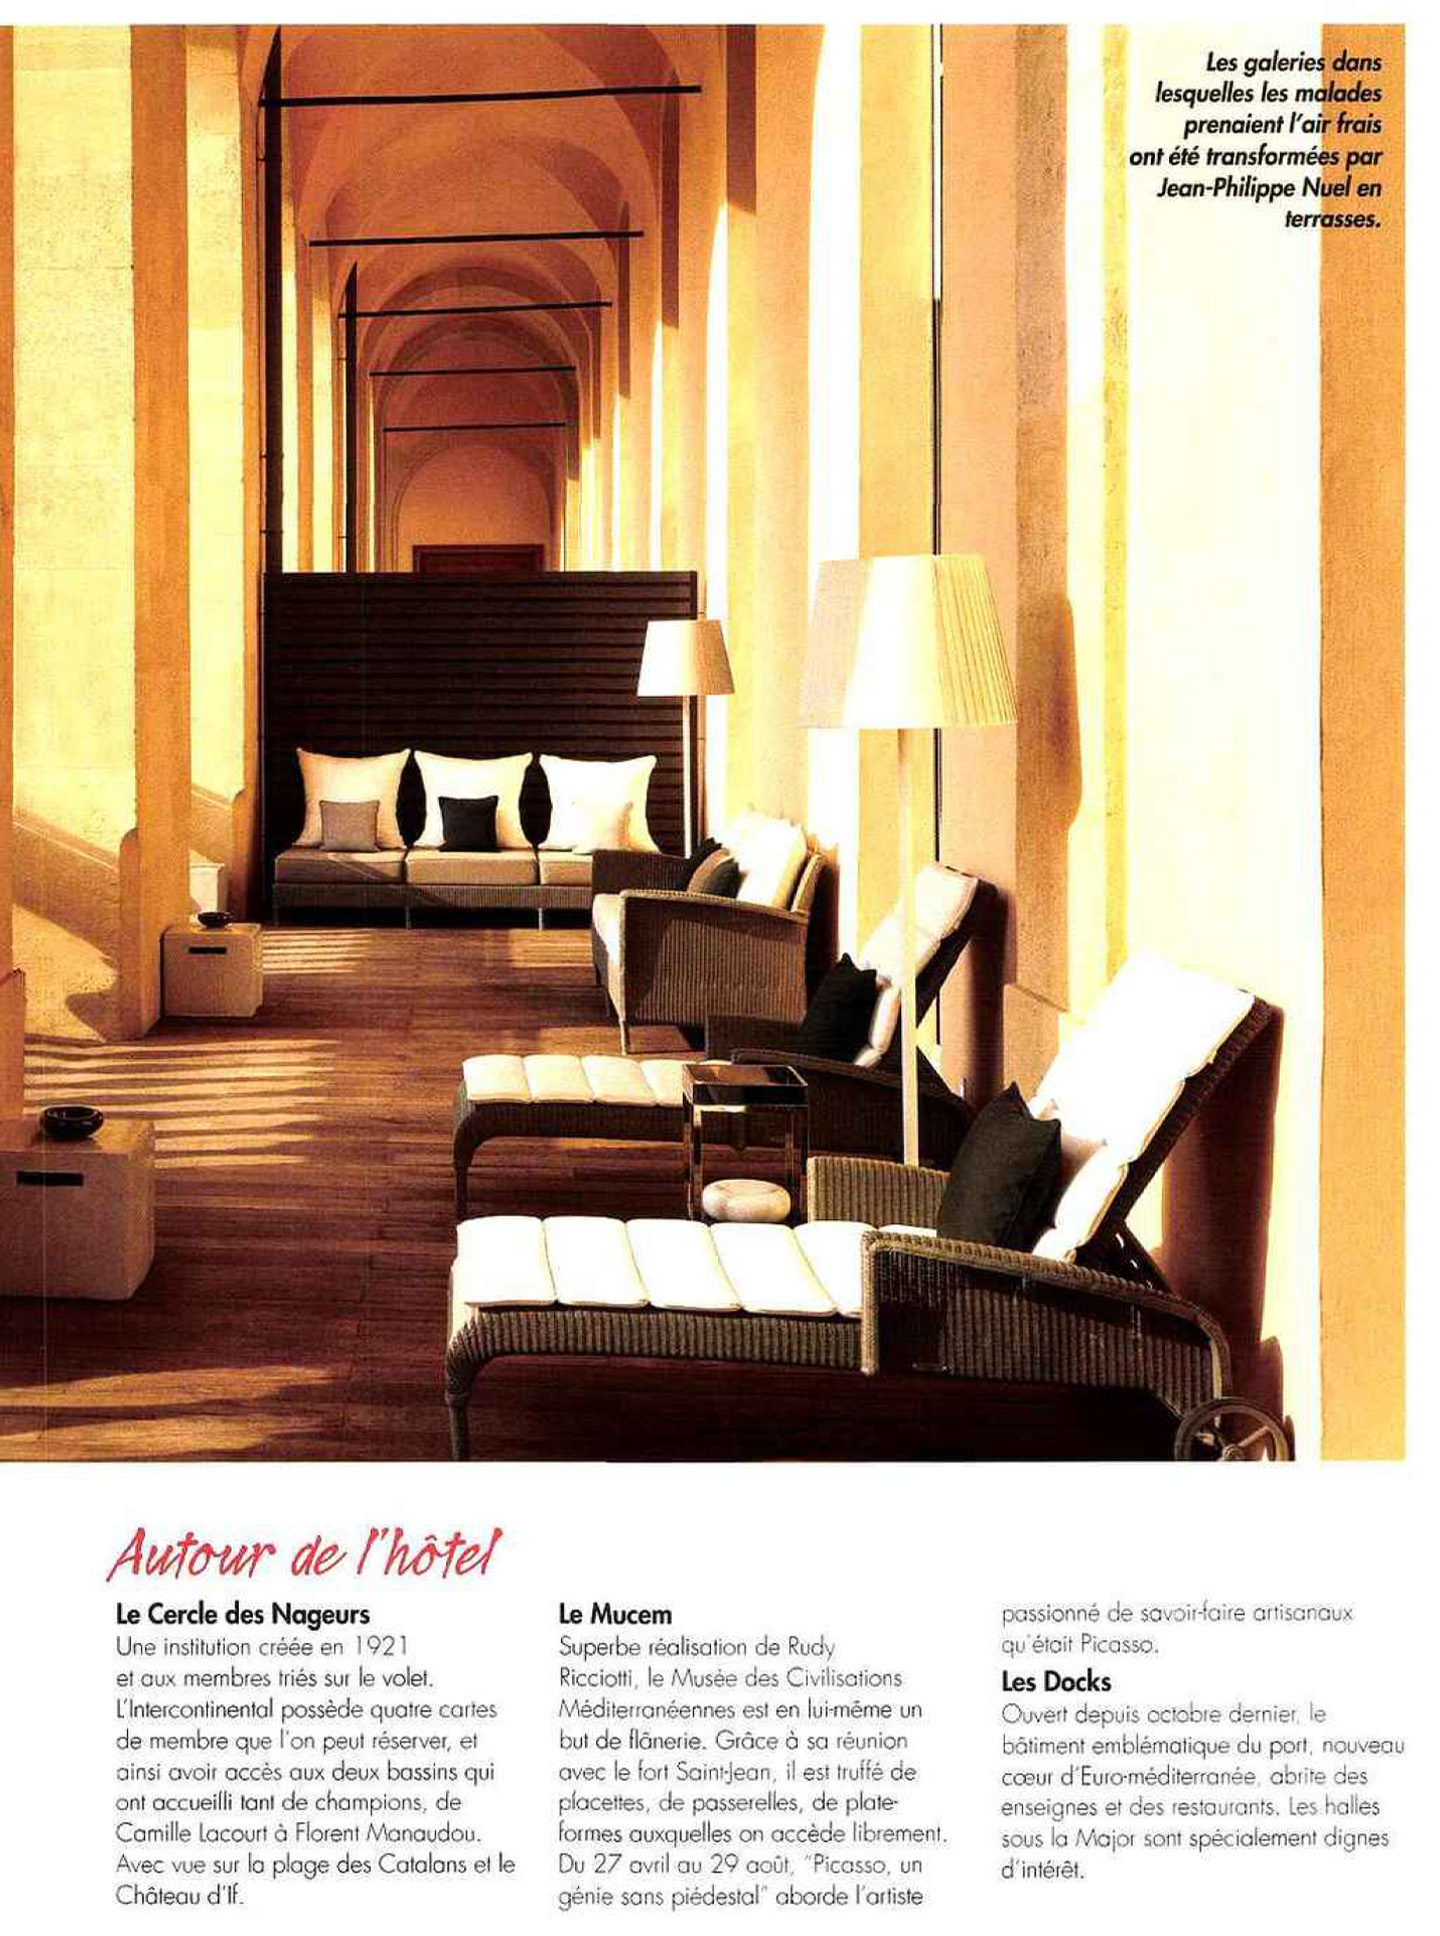 Article on the InterContinental Marseille Hotel Dieu realized by the studio jean-Philippe Nuel in the magazine Hotel & lodge, new luxury hotel, luxury interior design, historical heritage